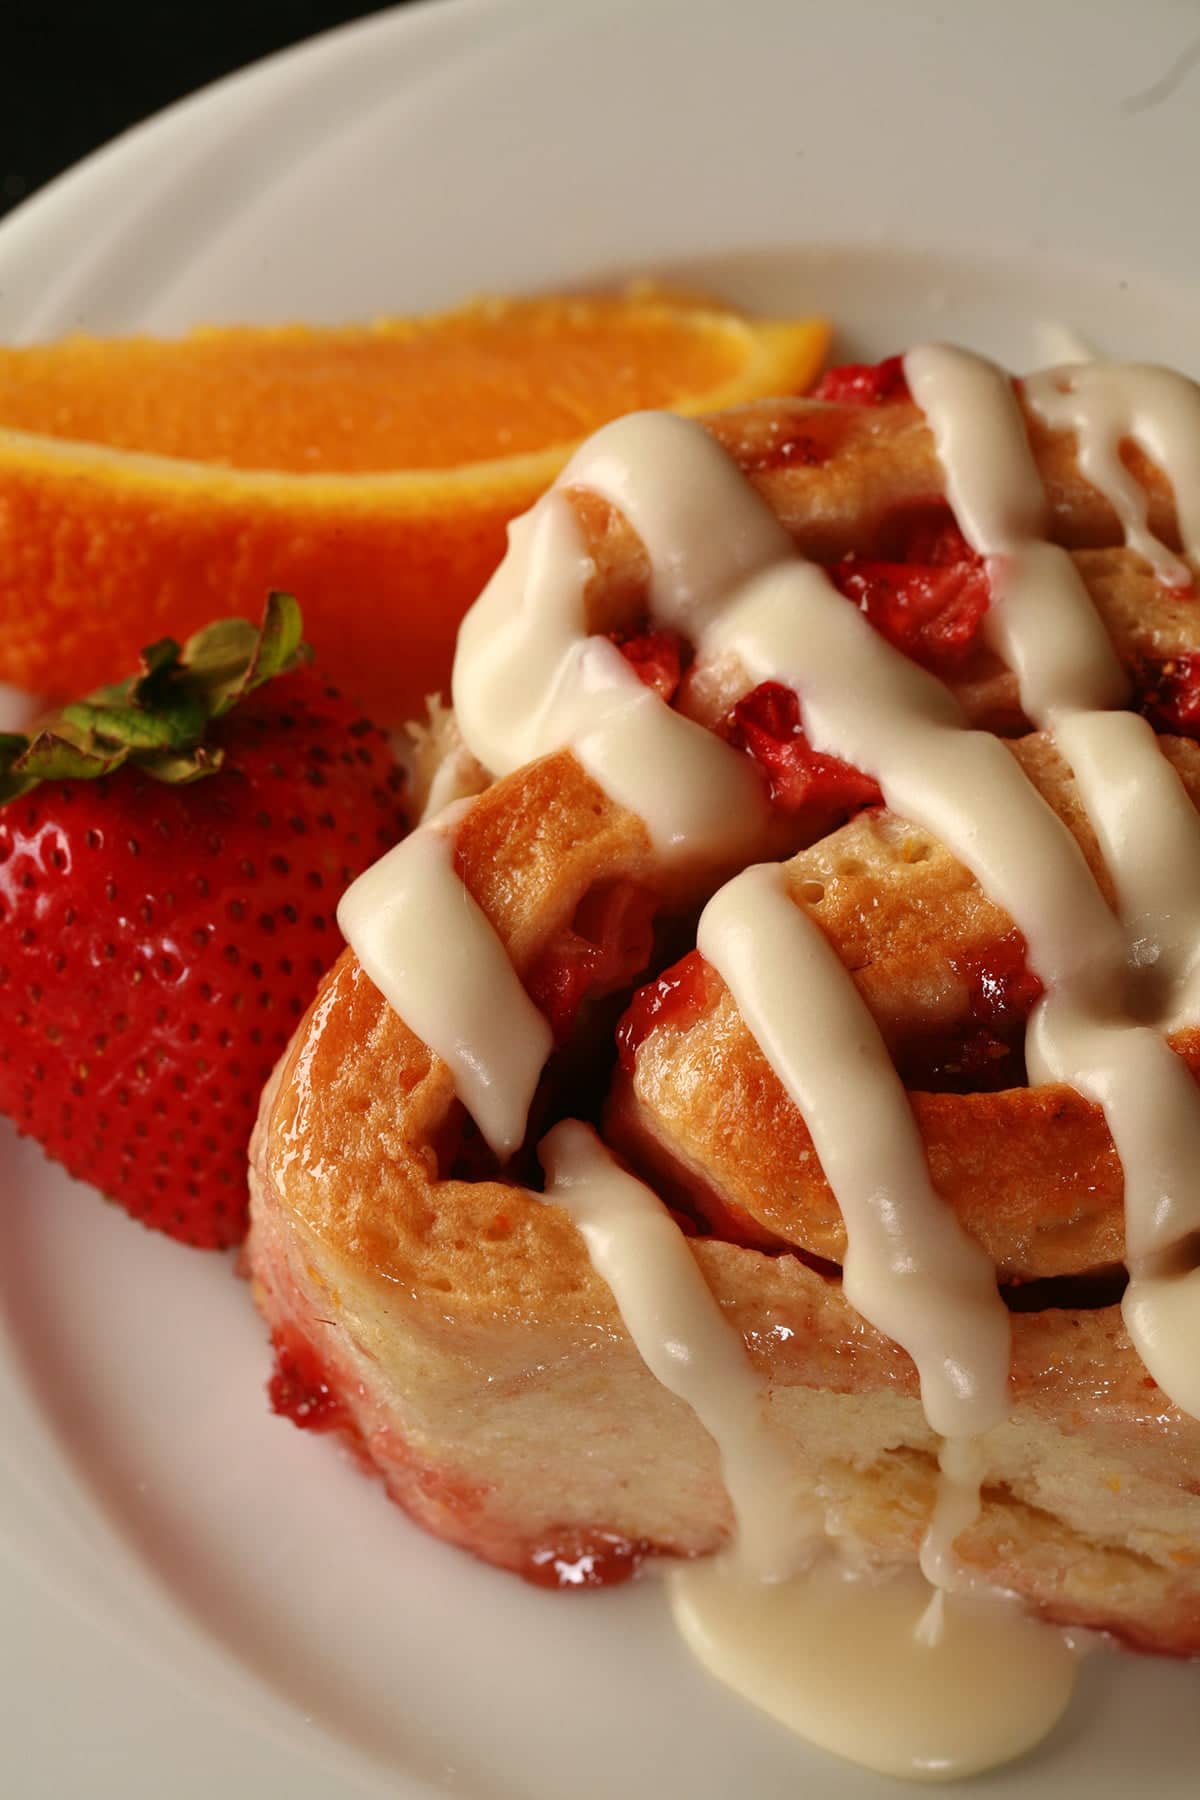 An orange strawberry roll on a white plate, with a fresh strawberry and an orange slice next to it